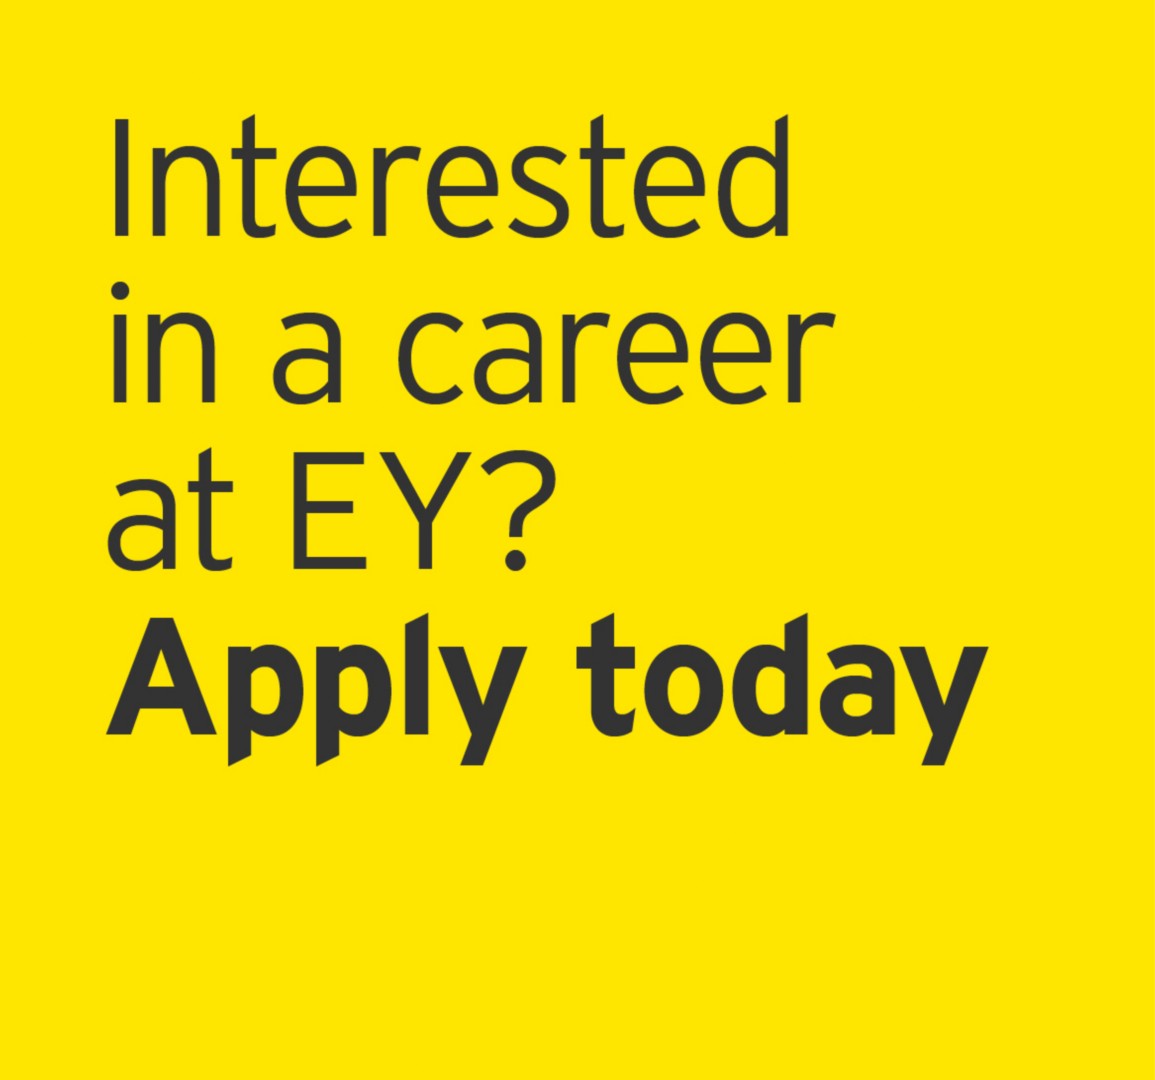 Interested in a career at EY? Apply today.